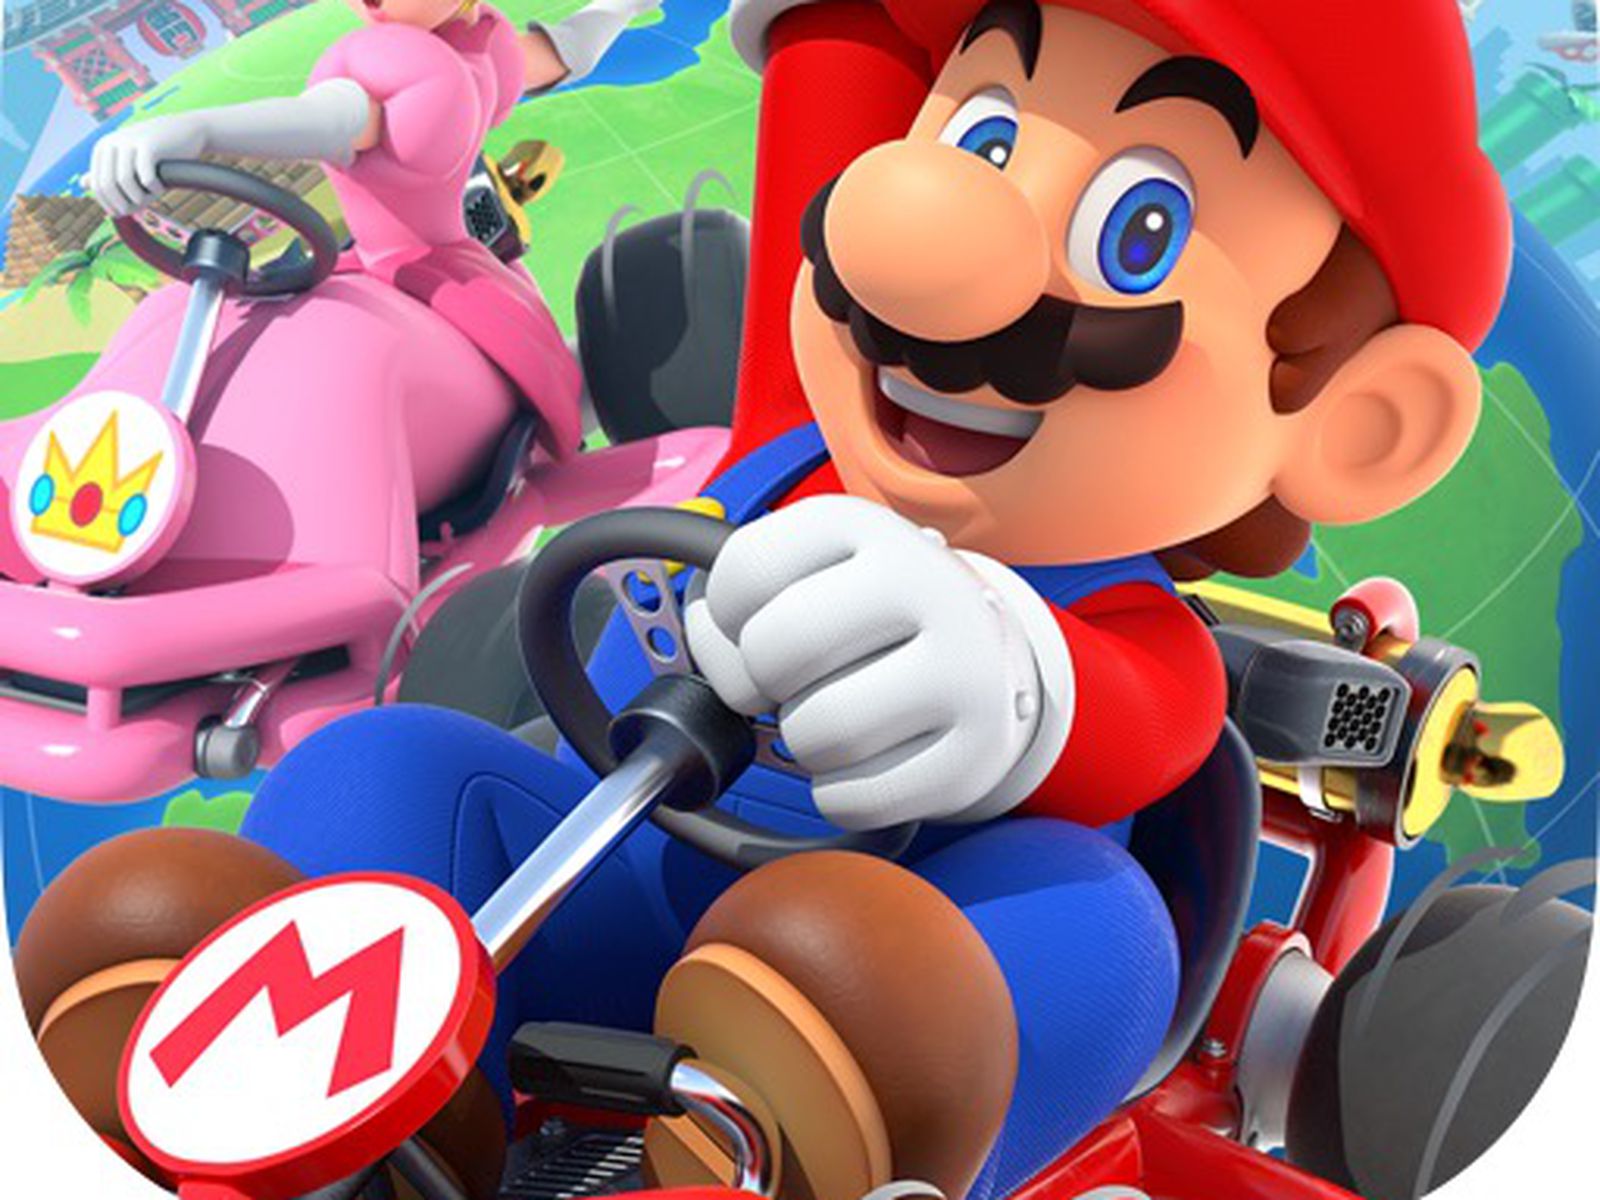 Nintendo's 'Mario Kart Tour' is out now for iPhone, iPad and Android